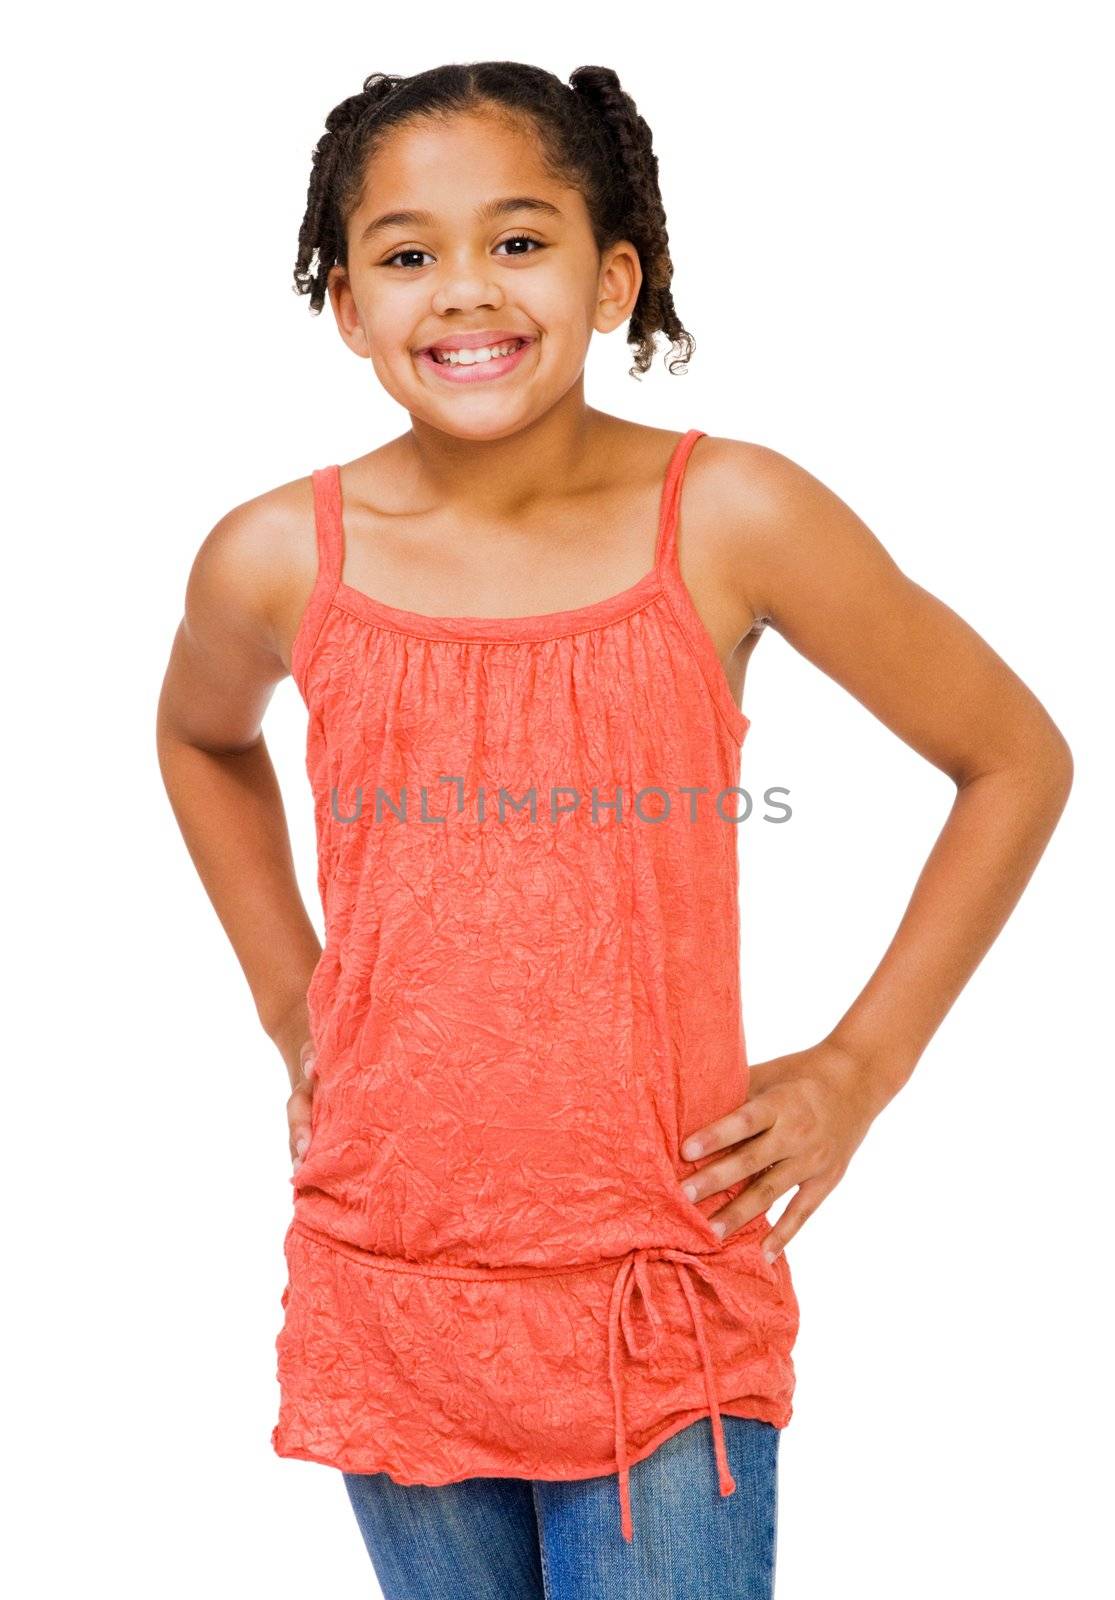 Child standing and smiling isolated over white